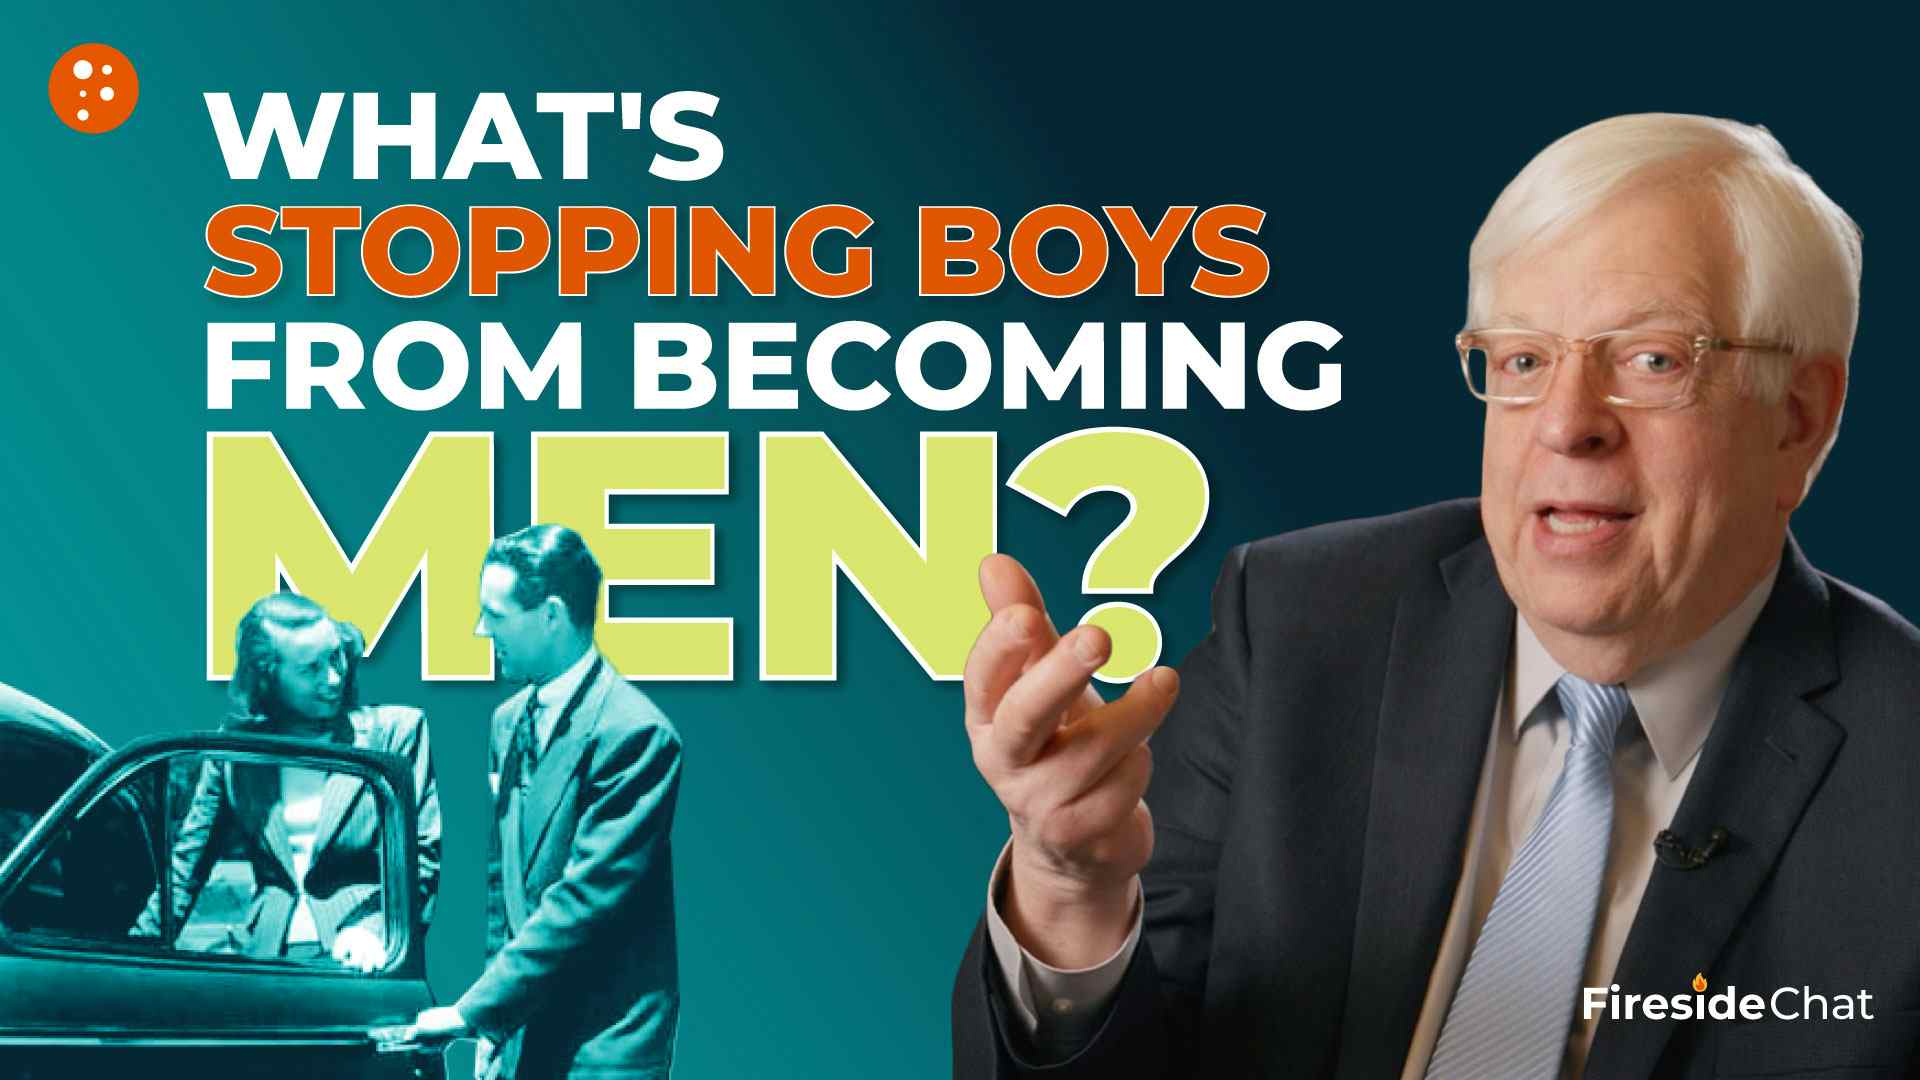 What’s Stopping Boys from Becoming Men?